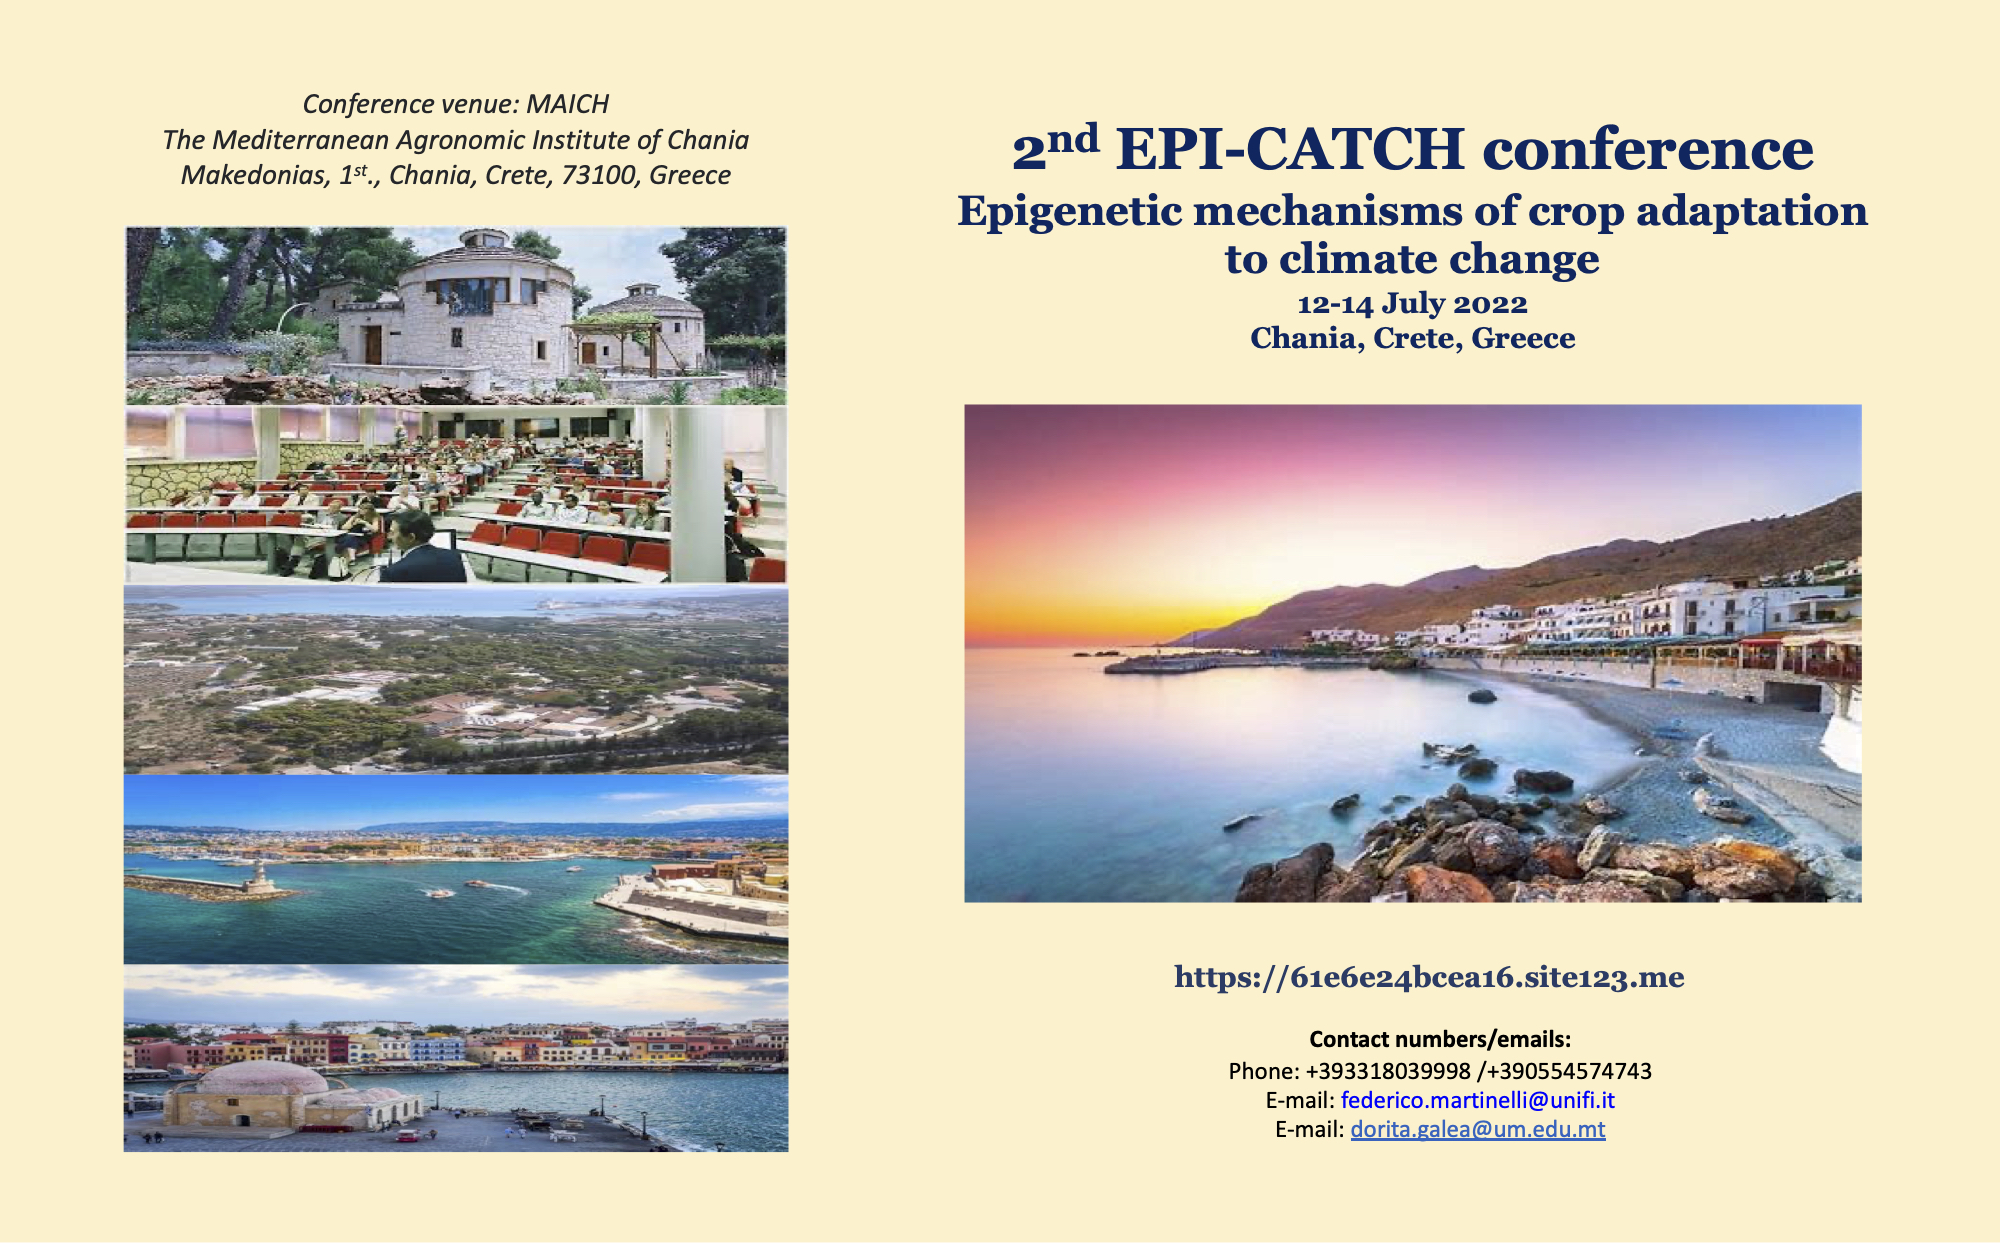 2nd EPI-CATCH conference Epigenetic mechanisms of crop adaptation to climate change